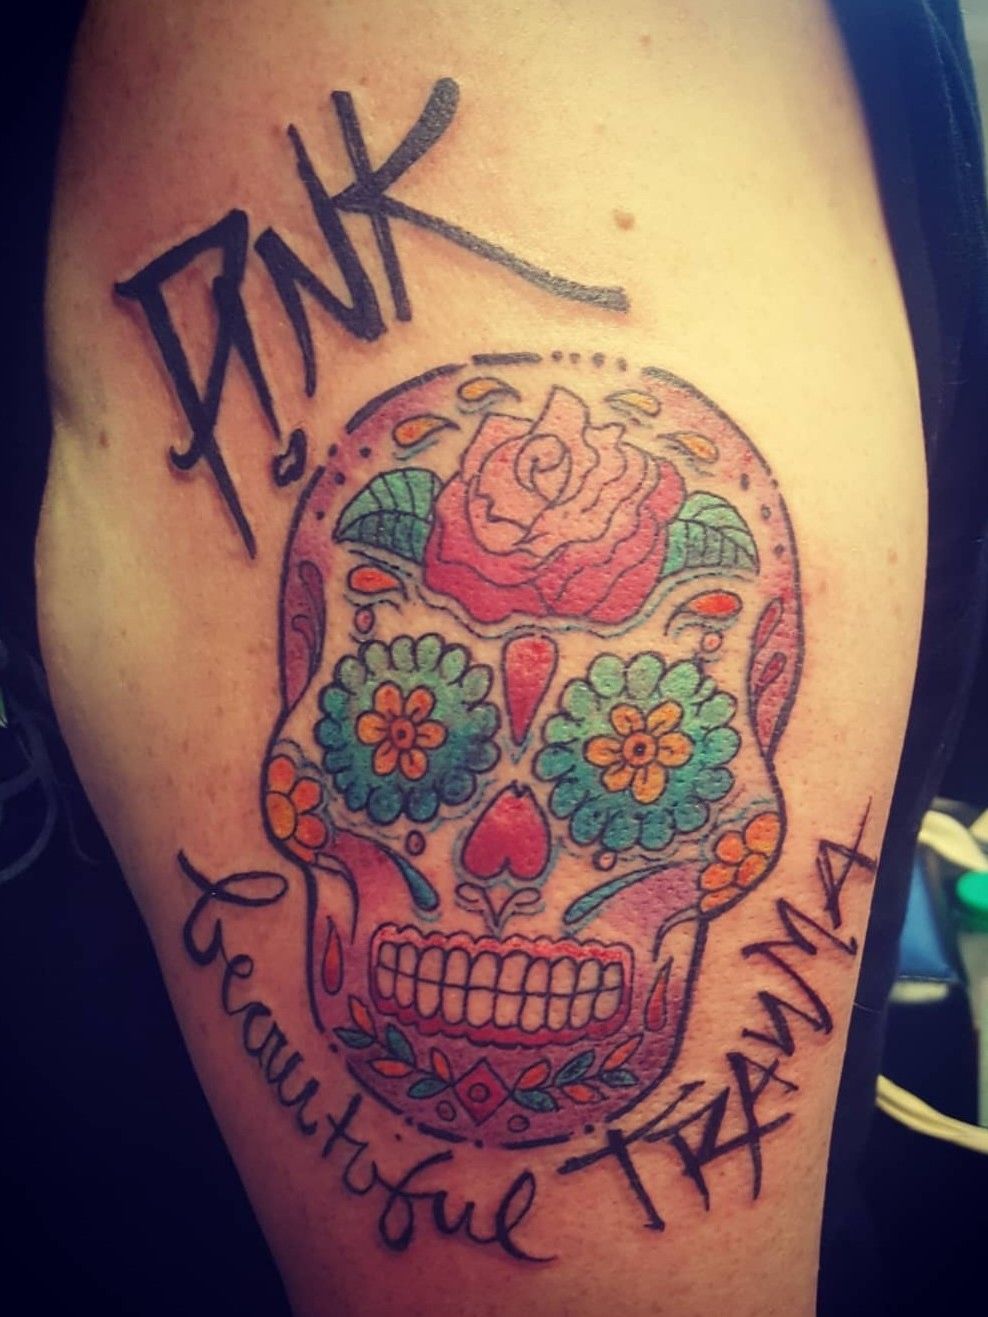 Day of the Dead Nurse FB is hacked Please message us at  royalspadetattoogmailcom for inquiries thx Royal Spade Tattoo2566861555   By Royal Spade Tattoo  Facebook